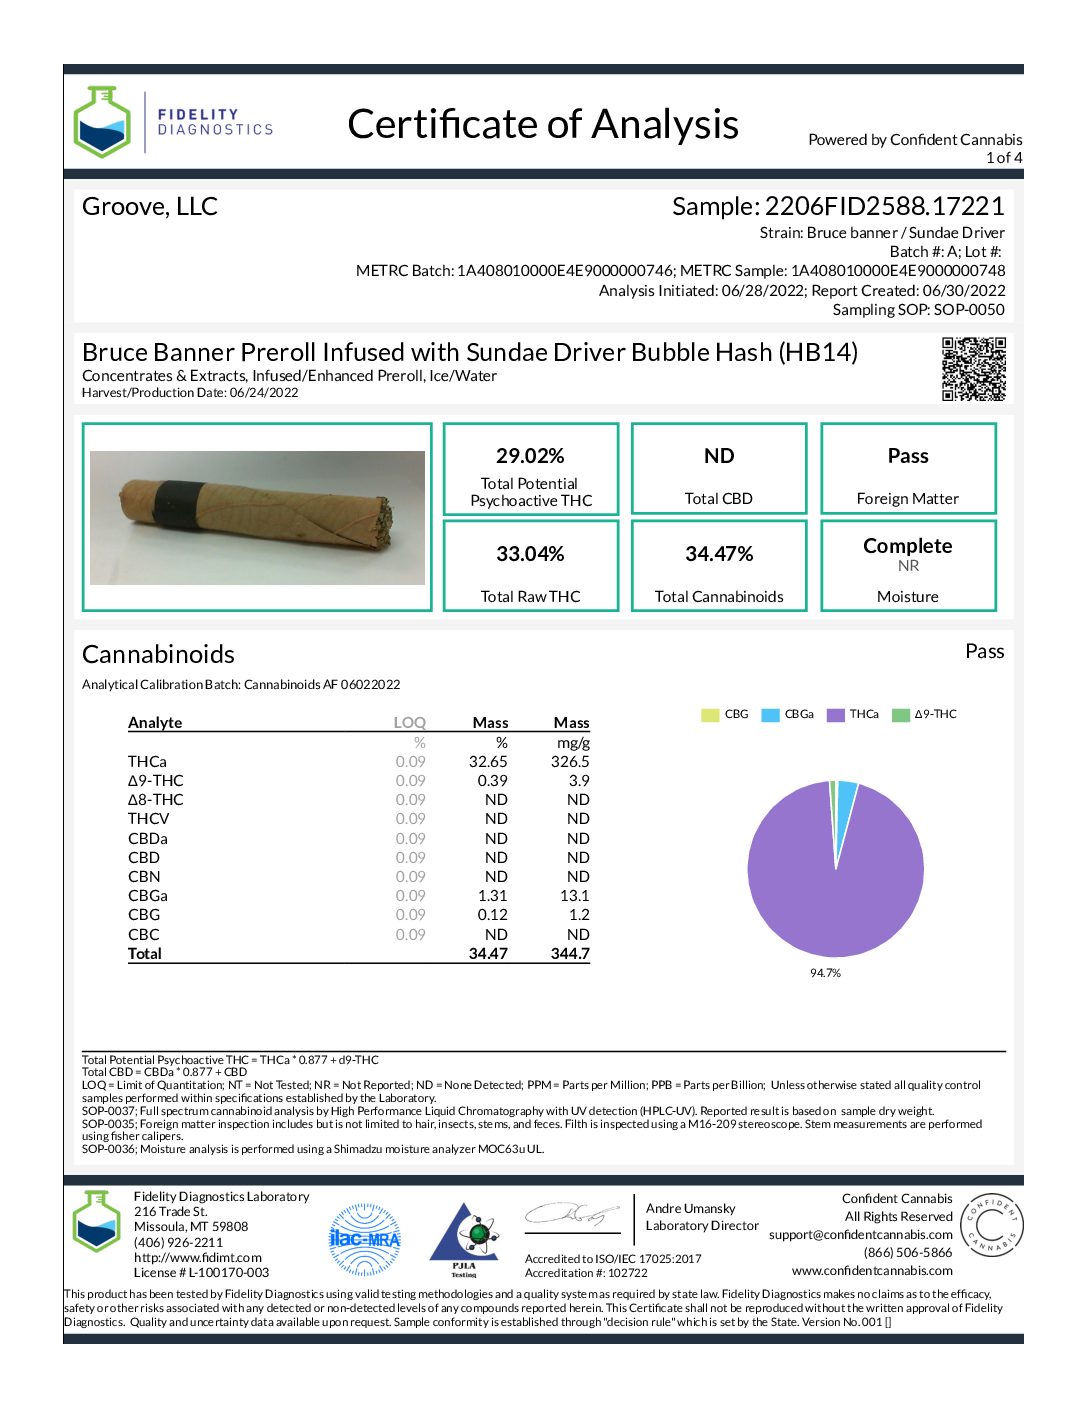 https://groovesolventless.com/wp-content/uploads/2022/06/Bruce-Banner-Preroll-Infused-with-Sundae-Driver-Bubble-Hash-HB14-pdf.jpg